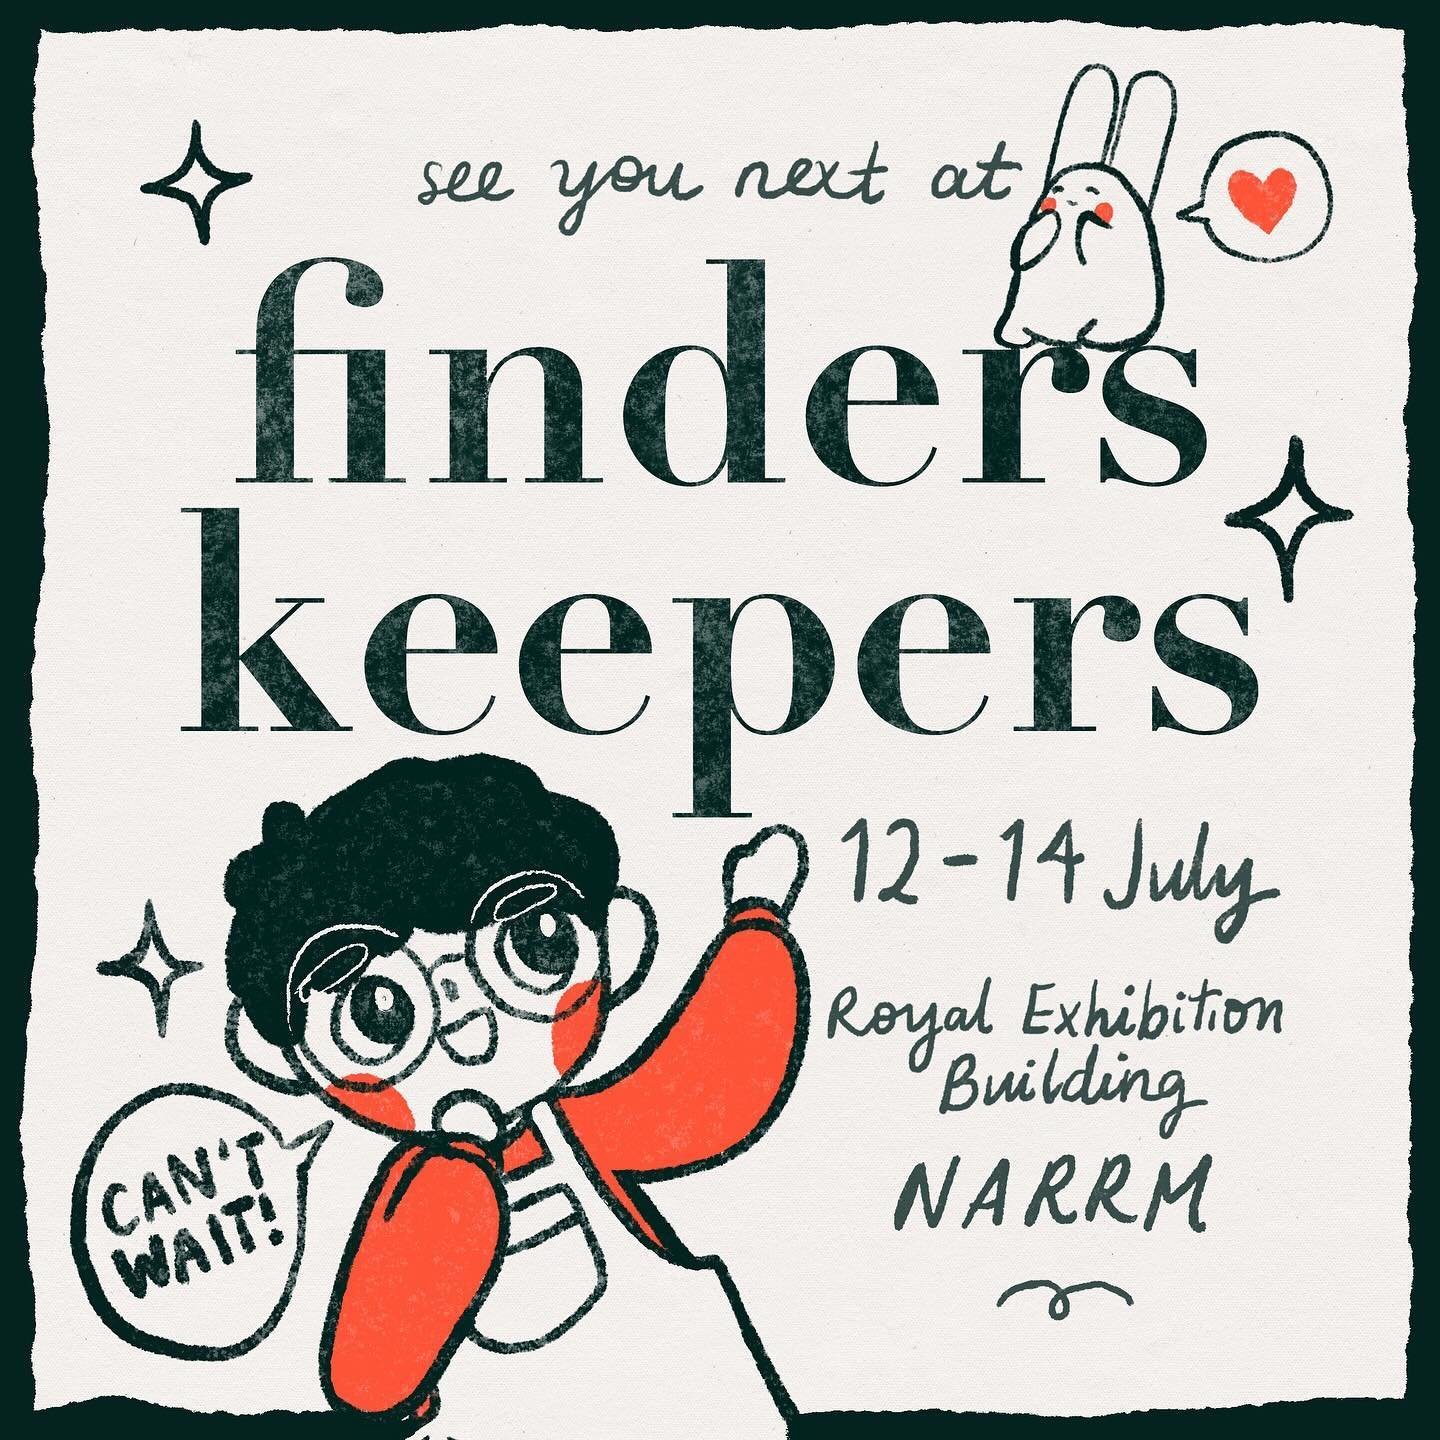 💛see you soon at @finders_keepers 😚

It is officially less than 60 days away now before Finders Keepers comes to Melbourne/ Narrm 🥰🙌🏻 and this Winter, @misu.juju will be joining !! 😍 I&rsquo;m all kinds of excitement right now- can&rsquo;t wait